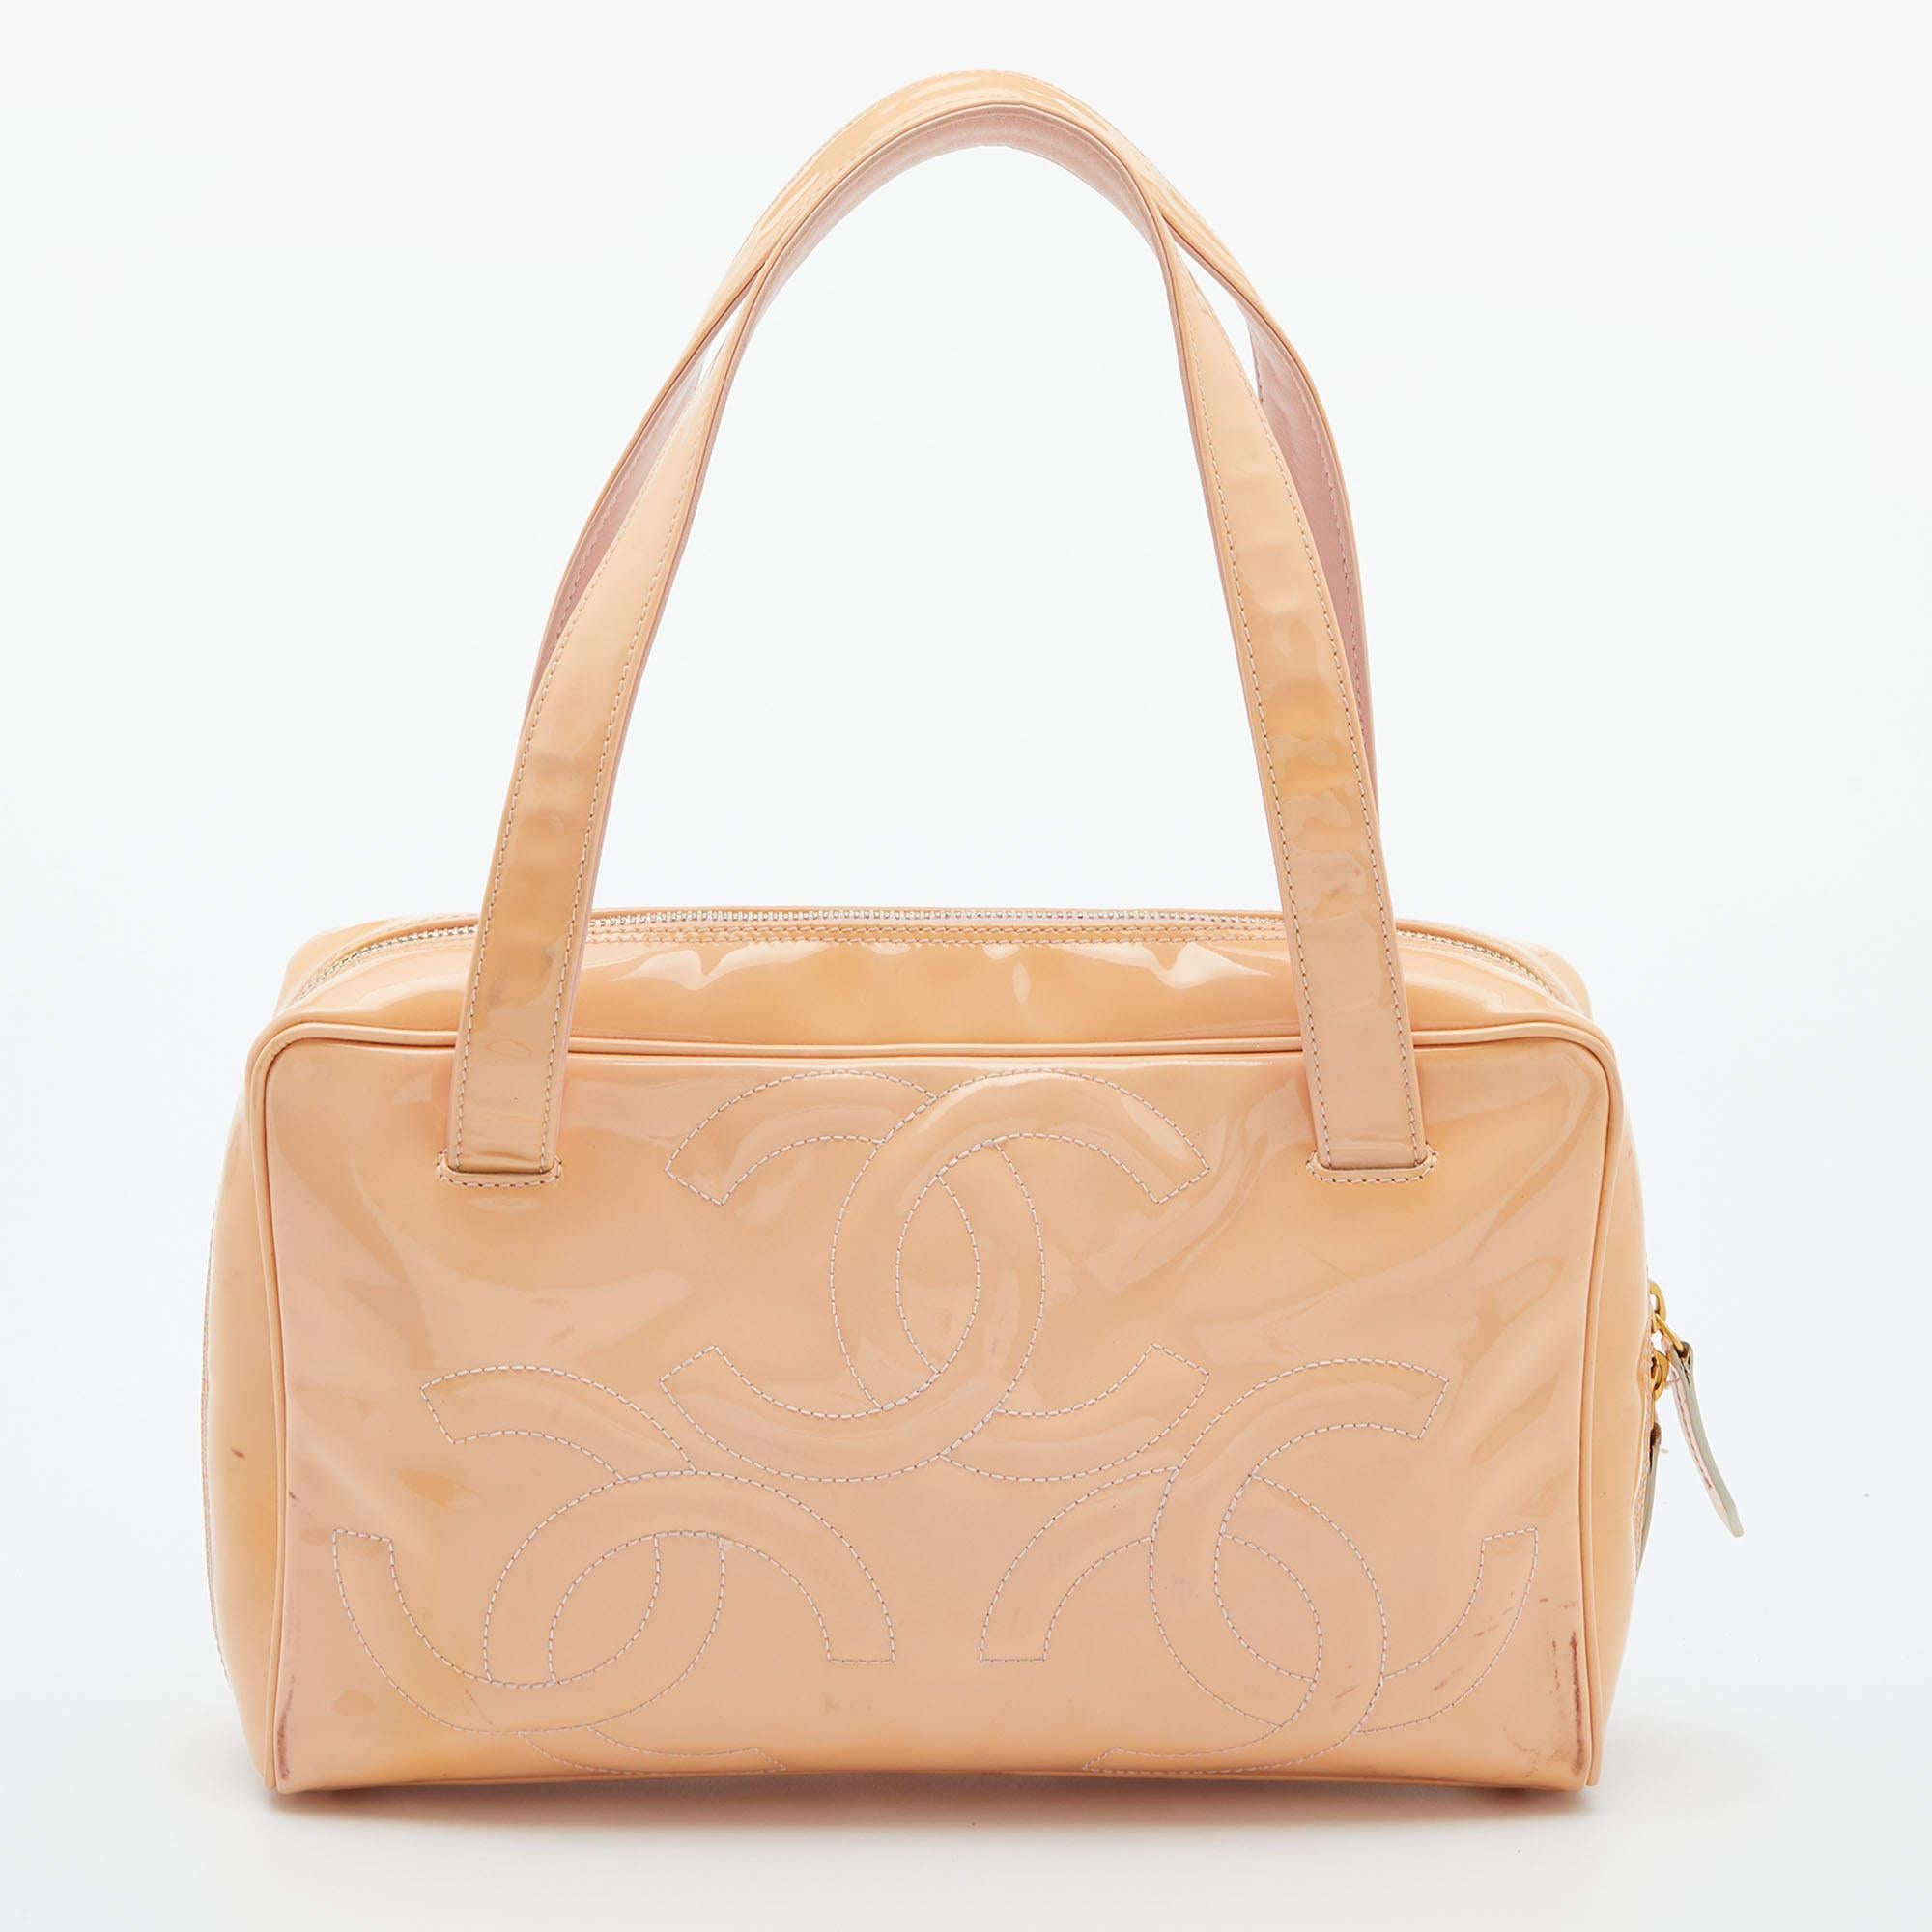 A classic handbag comes with the promise of enduring appeal, boosting your style time and again. This designer bag is one such creation. It’s a fine purchase.

Includes: Original Dustbag